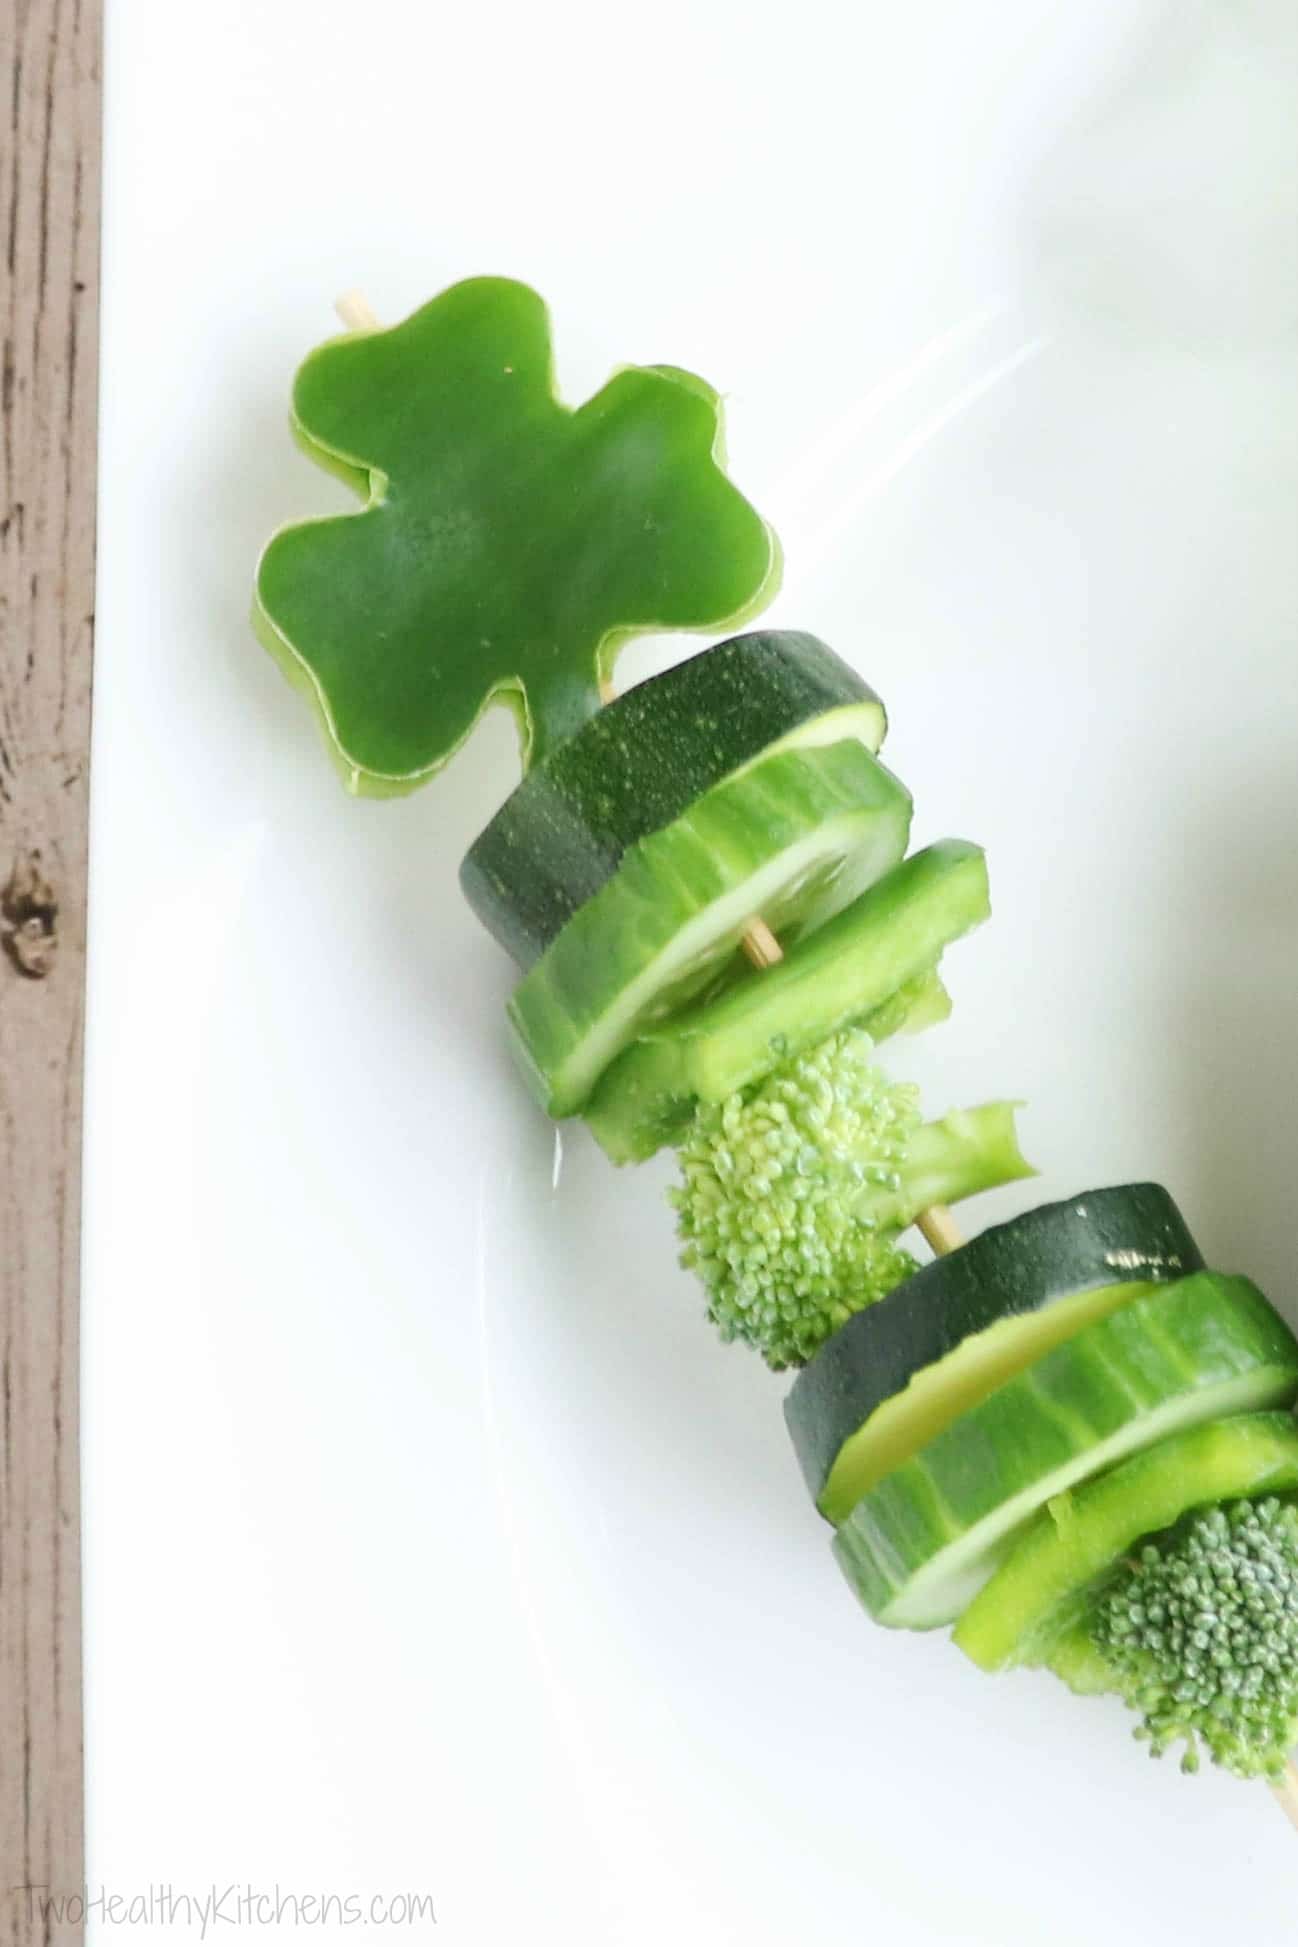 Closeup of one shamrock-topped skewer with rounds of cucumbers and zucchini, slices of green pepper and pieces of broccoli.